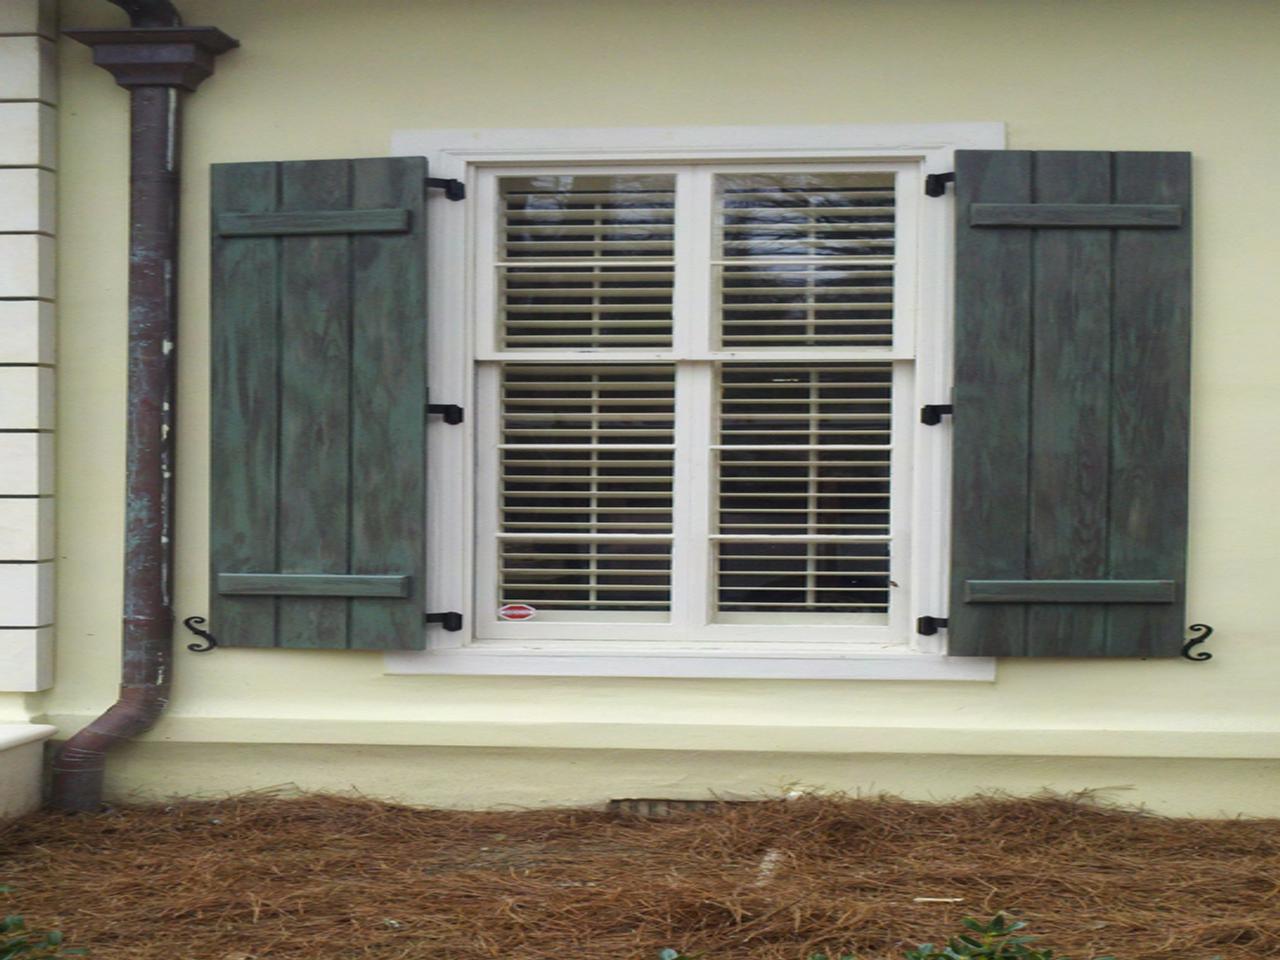 Board and batten shutters with hinges and shutter dogs